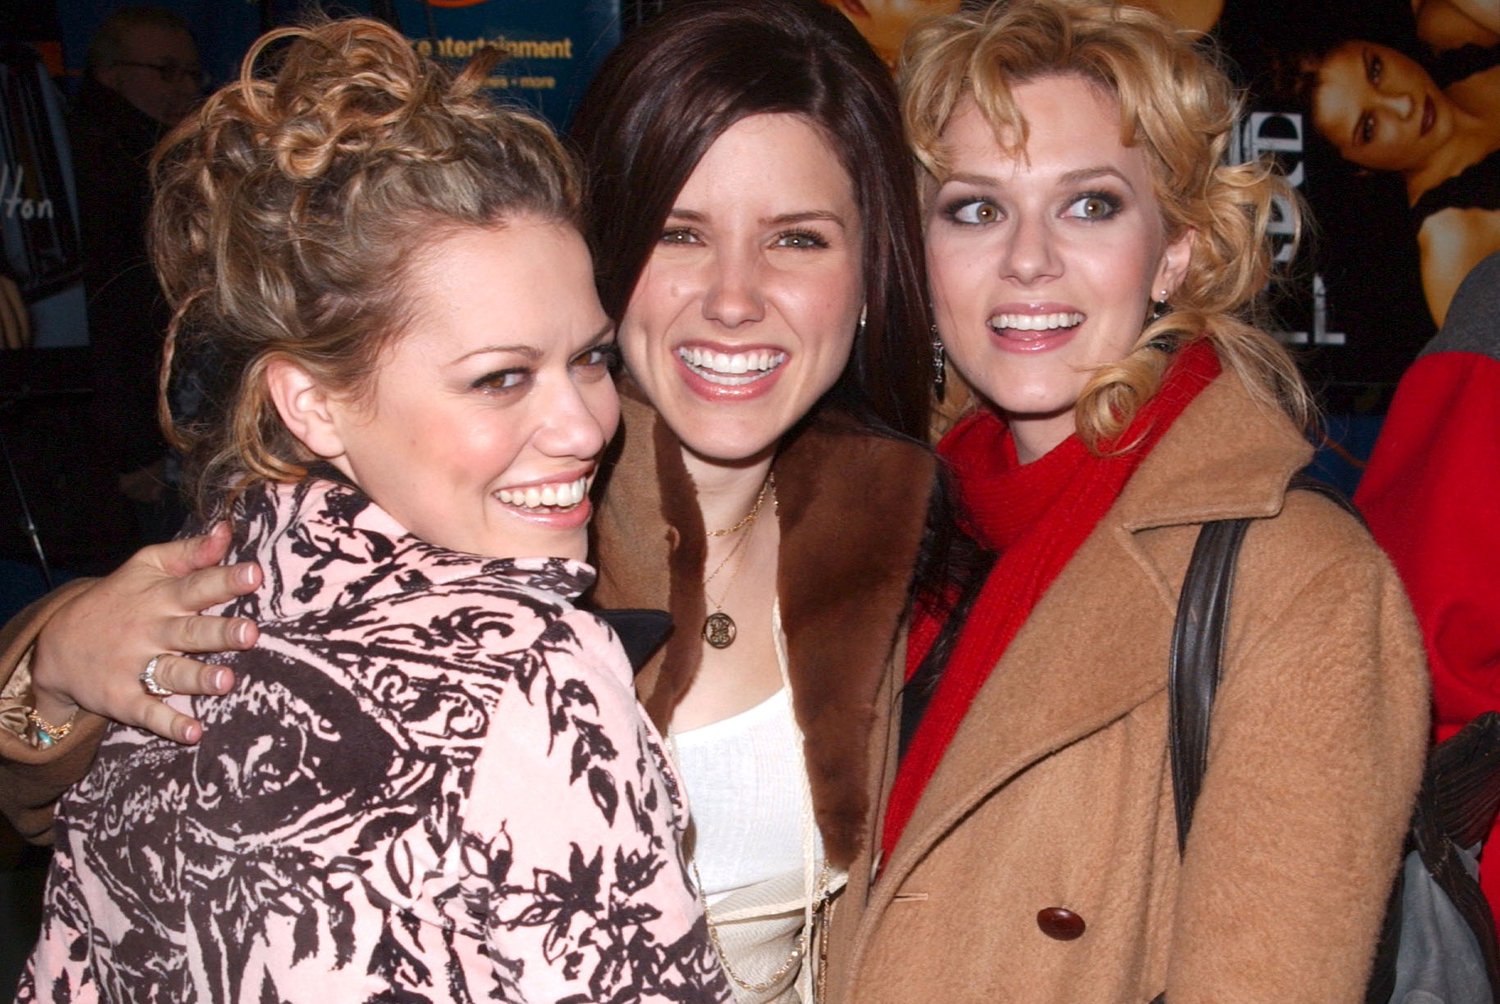 One Tree Hill stars Bethany Joy Lenz, Sophia Bush, and Hilarie Burton Morgan, who will all appear in an upcoming episode of Good Sam